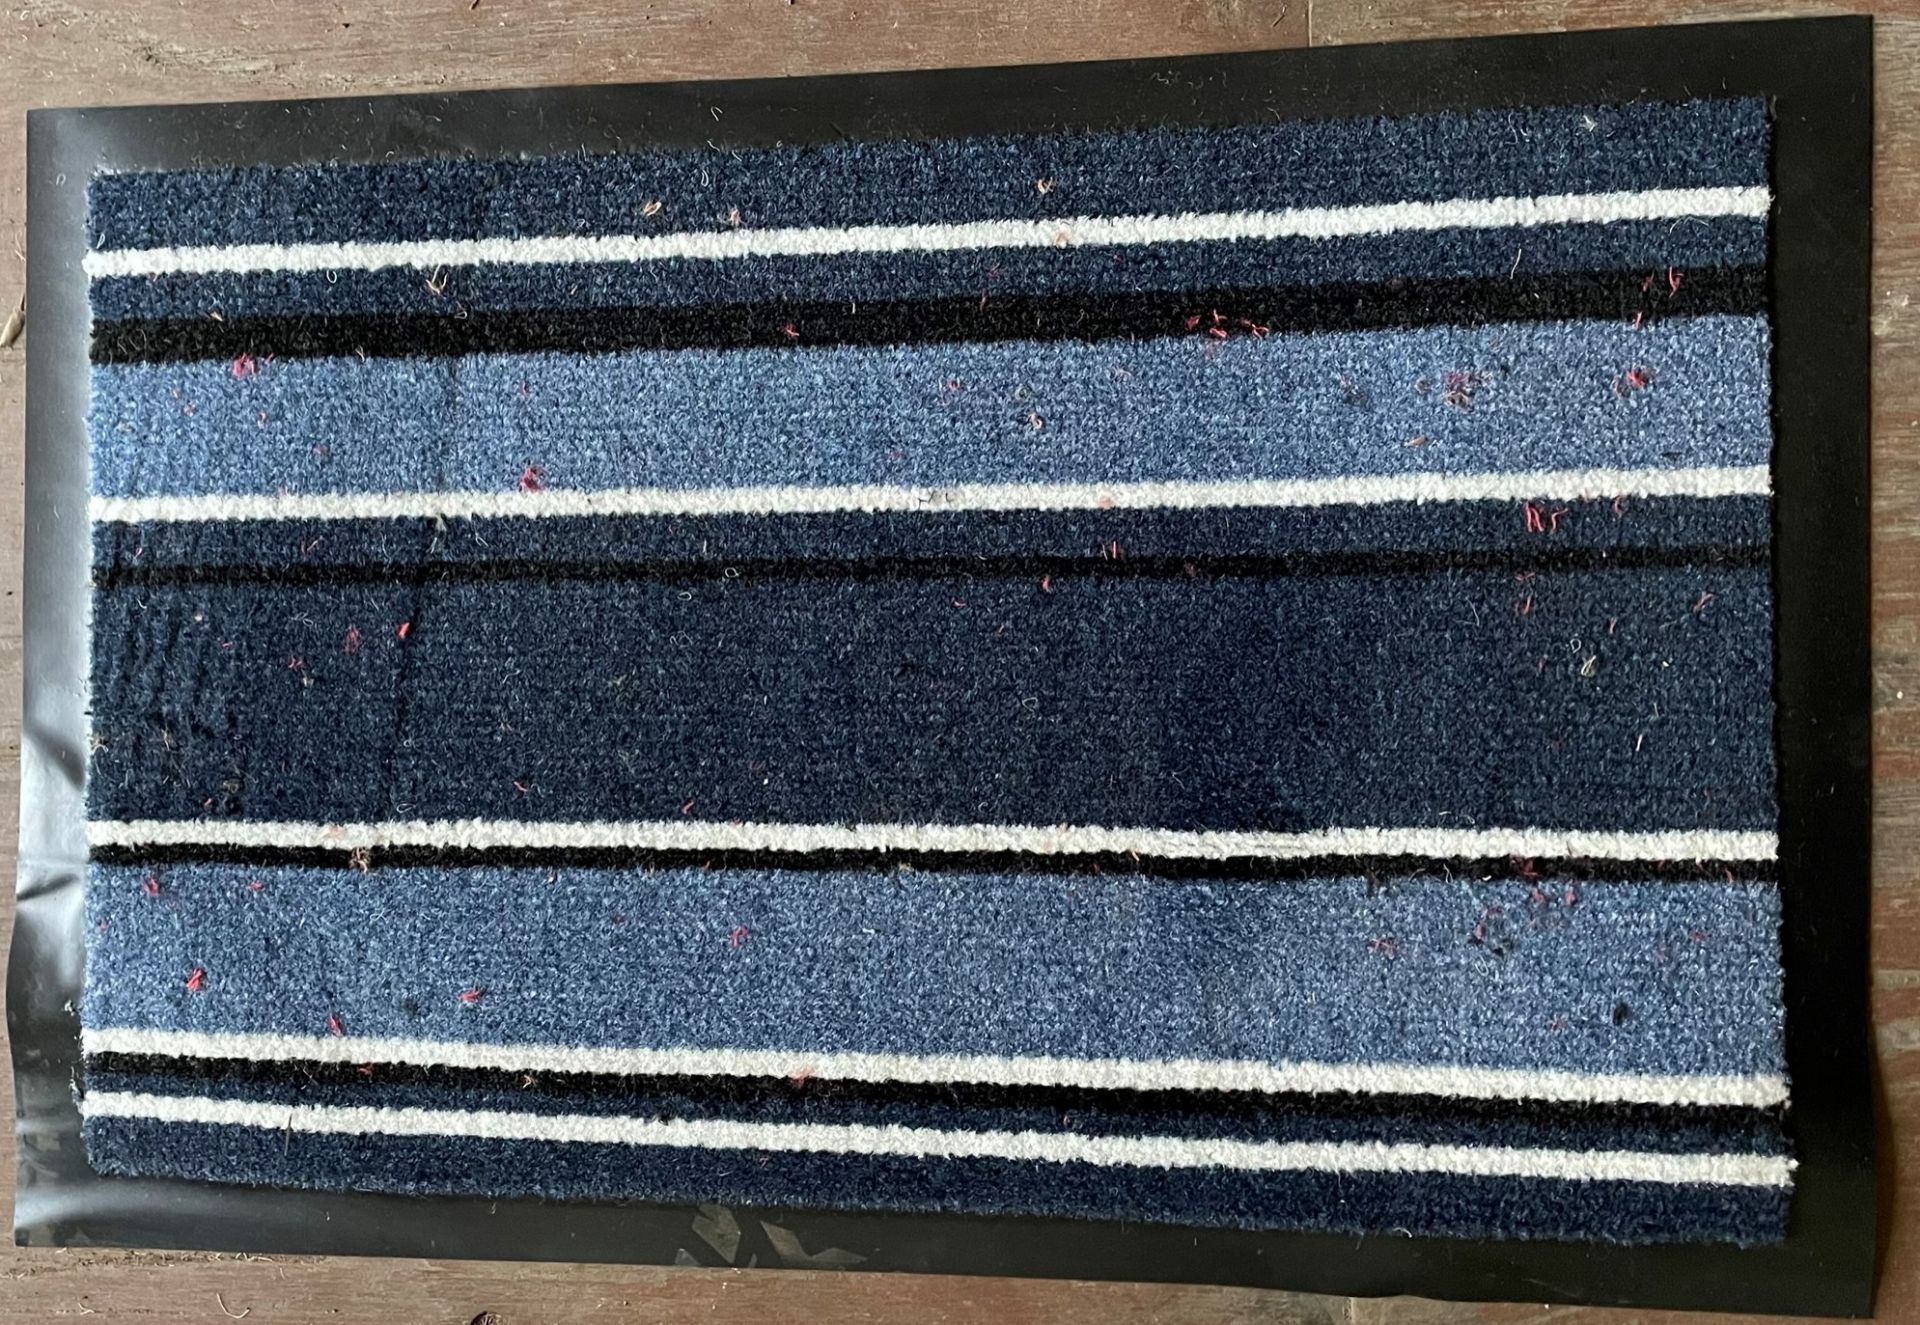 Contents to half pallet - approximately 450 blue striped rubber backed door mats approx.